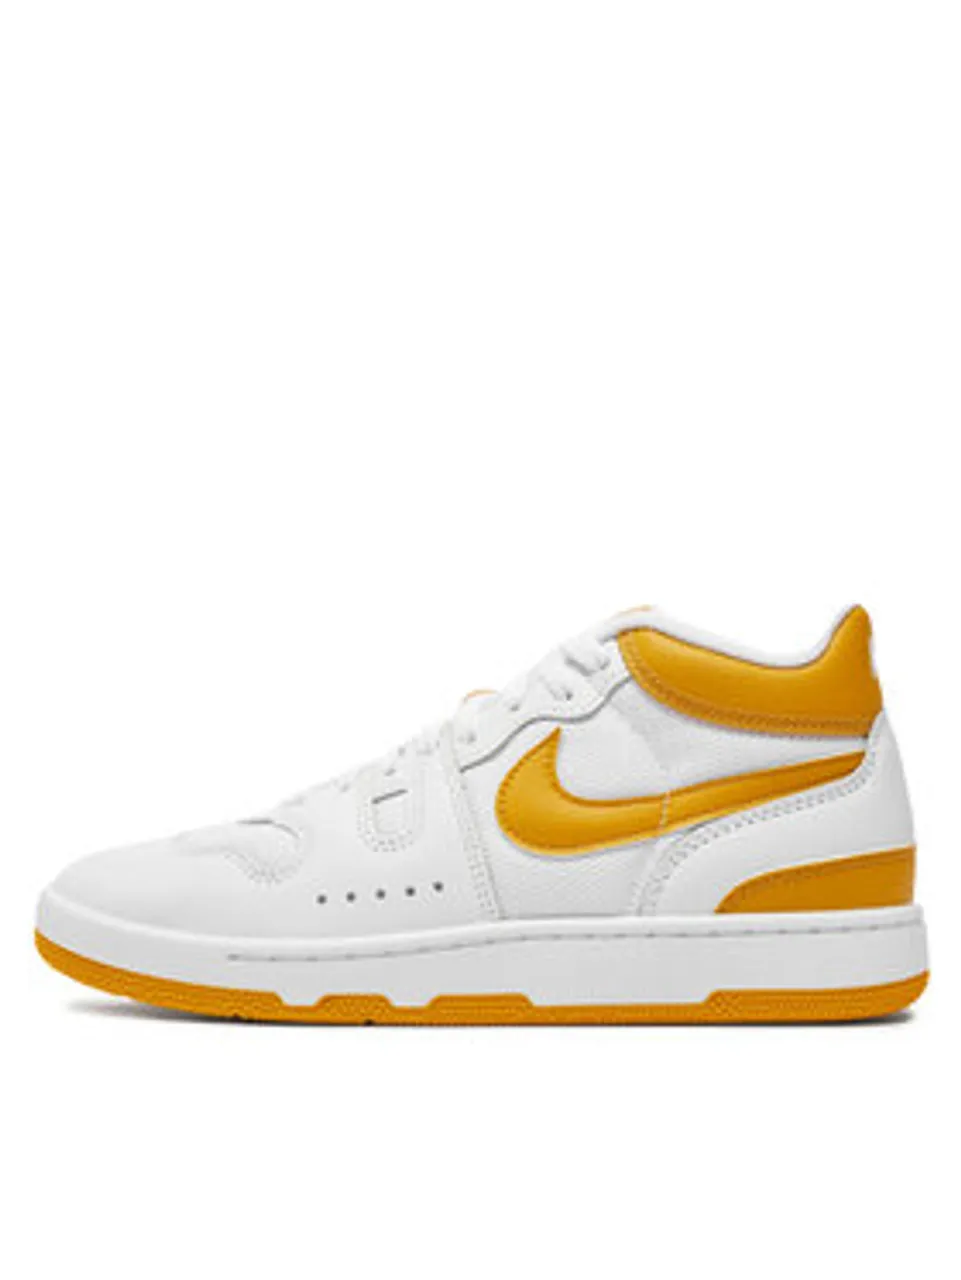 Nike Sneakers Attack Qs Sp FB8938 102 Weiß